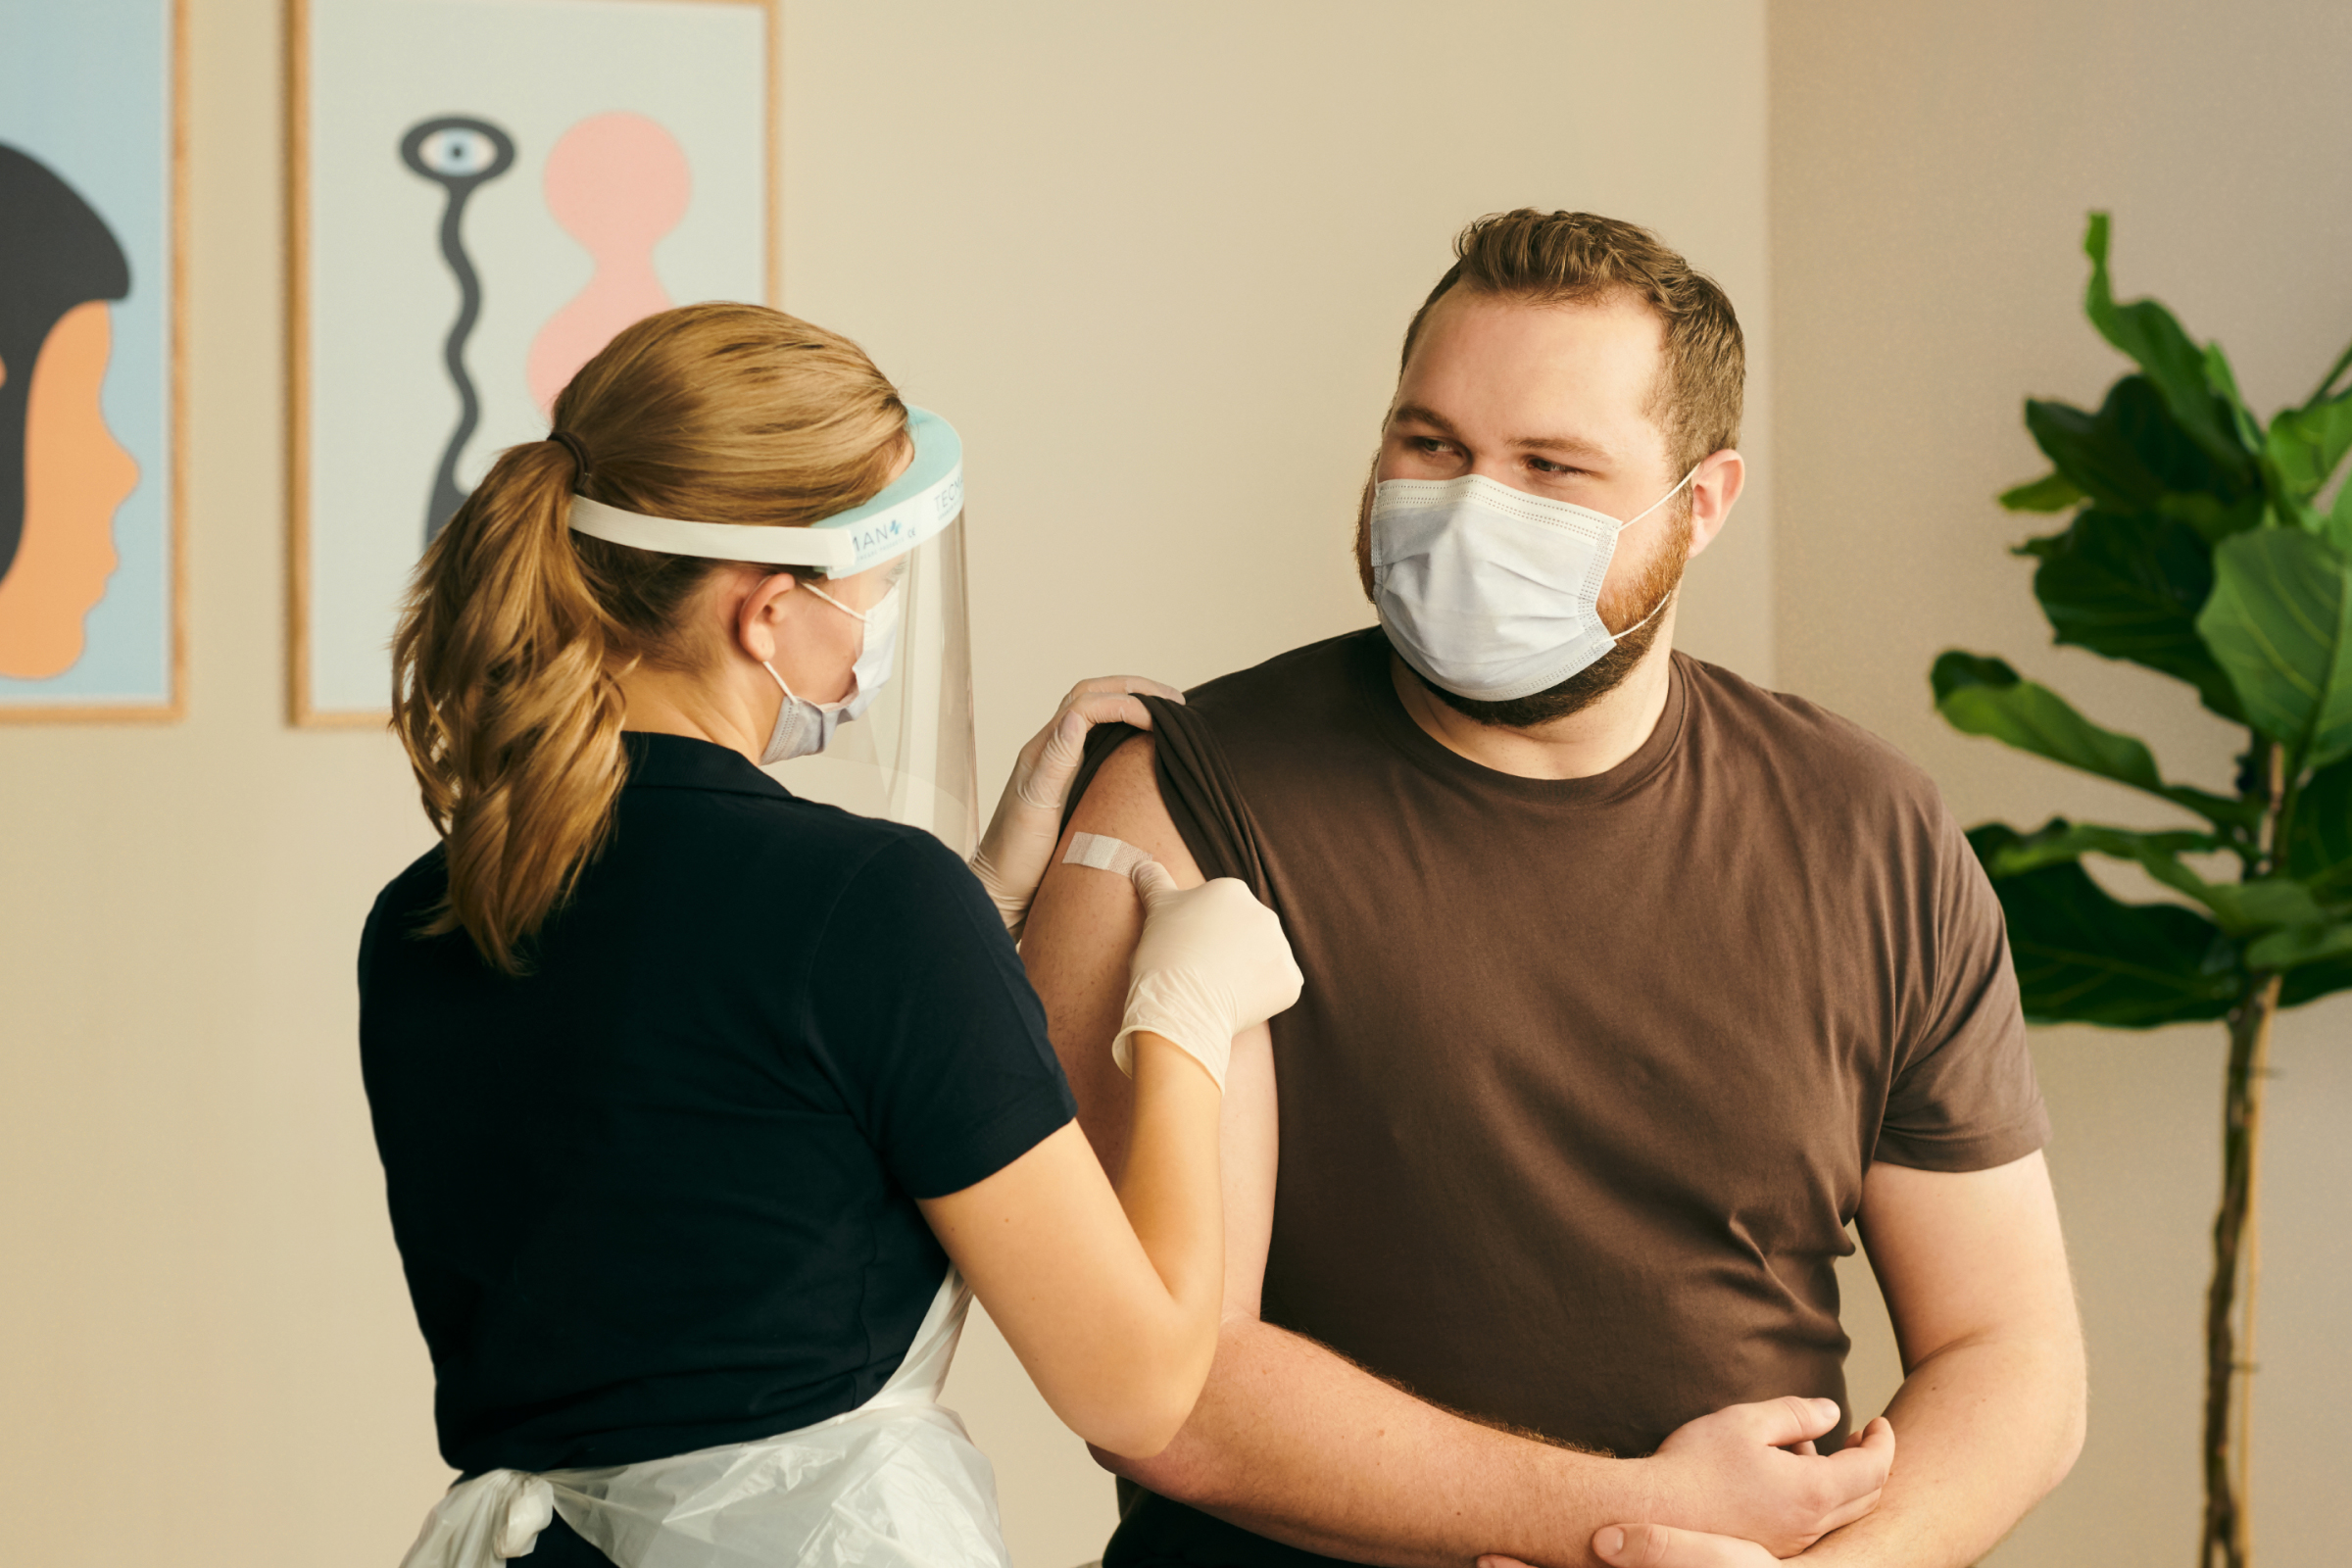 Man getting vaccinated against covid-19 by nurse